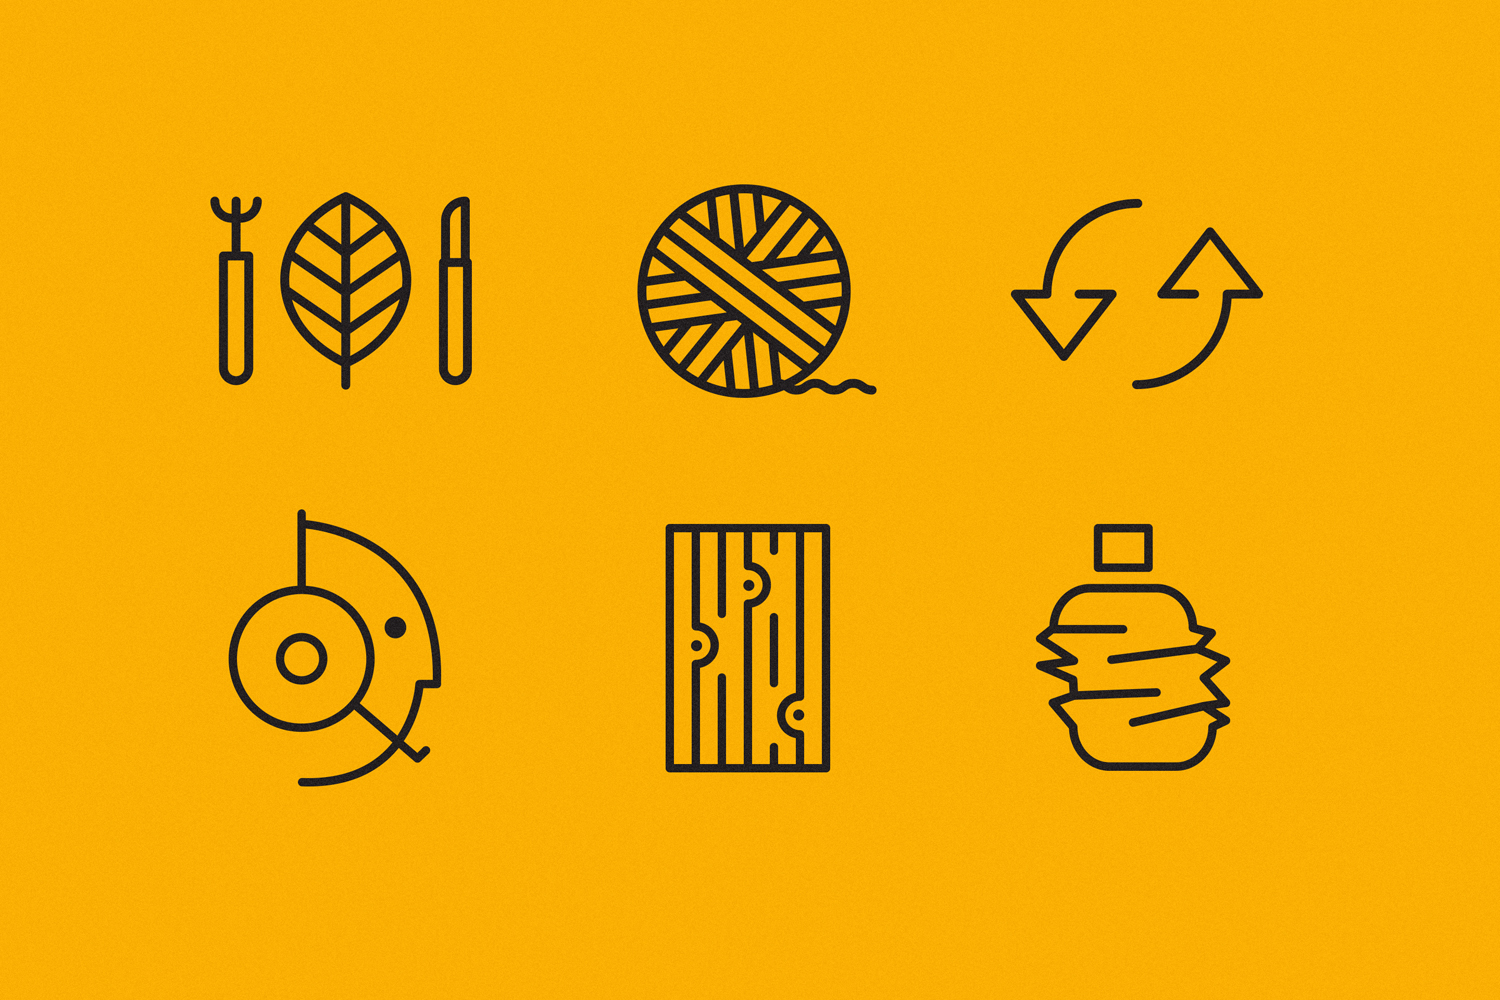 Iconography and pictograms designed by Bedow for Swedish clothing and gadget retailer Adisgladis